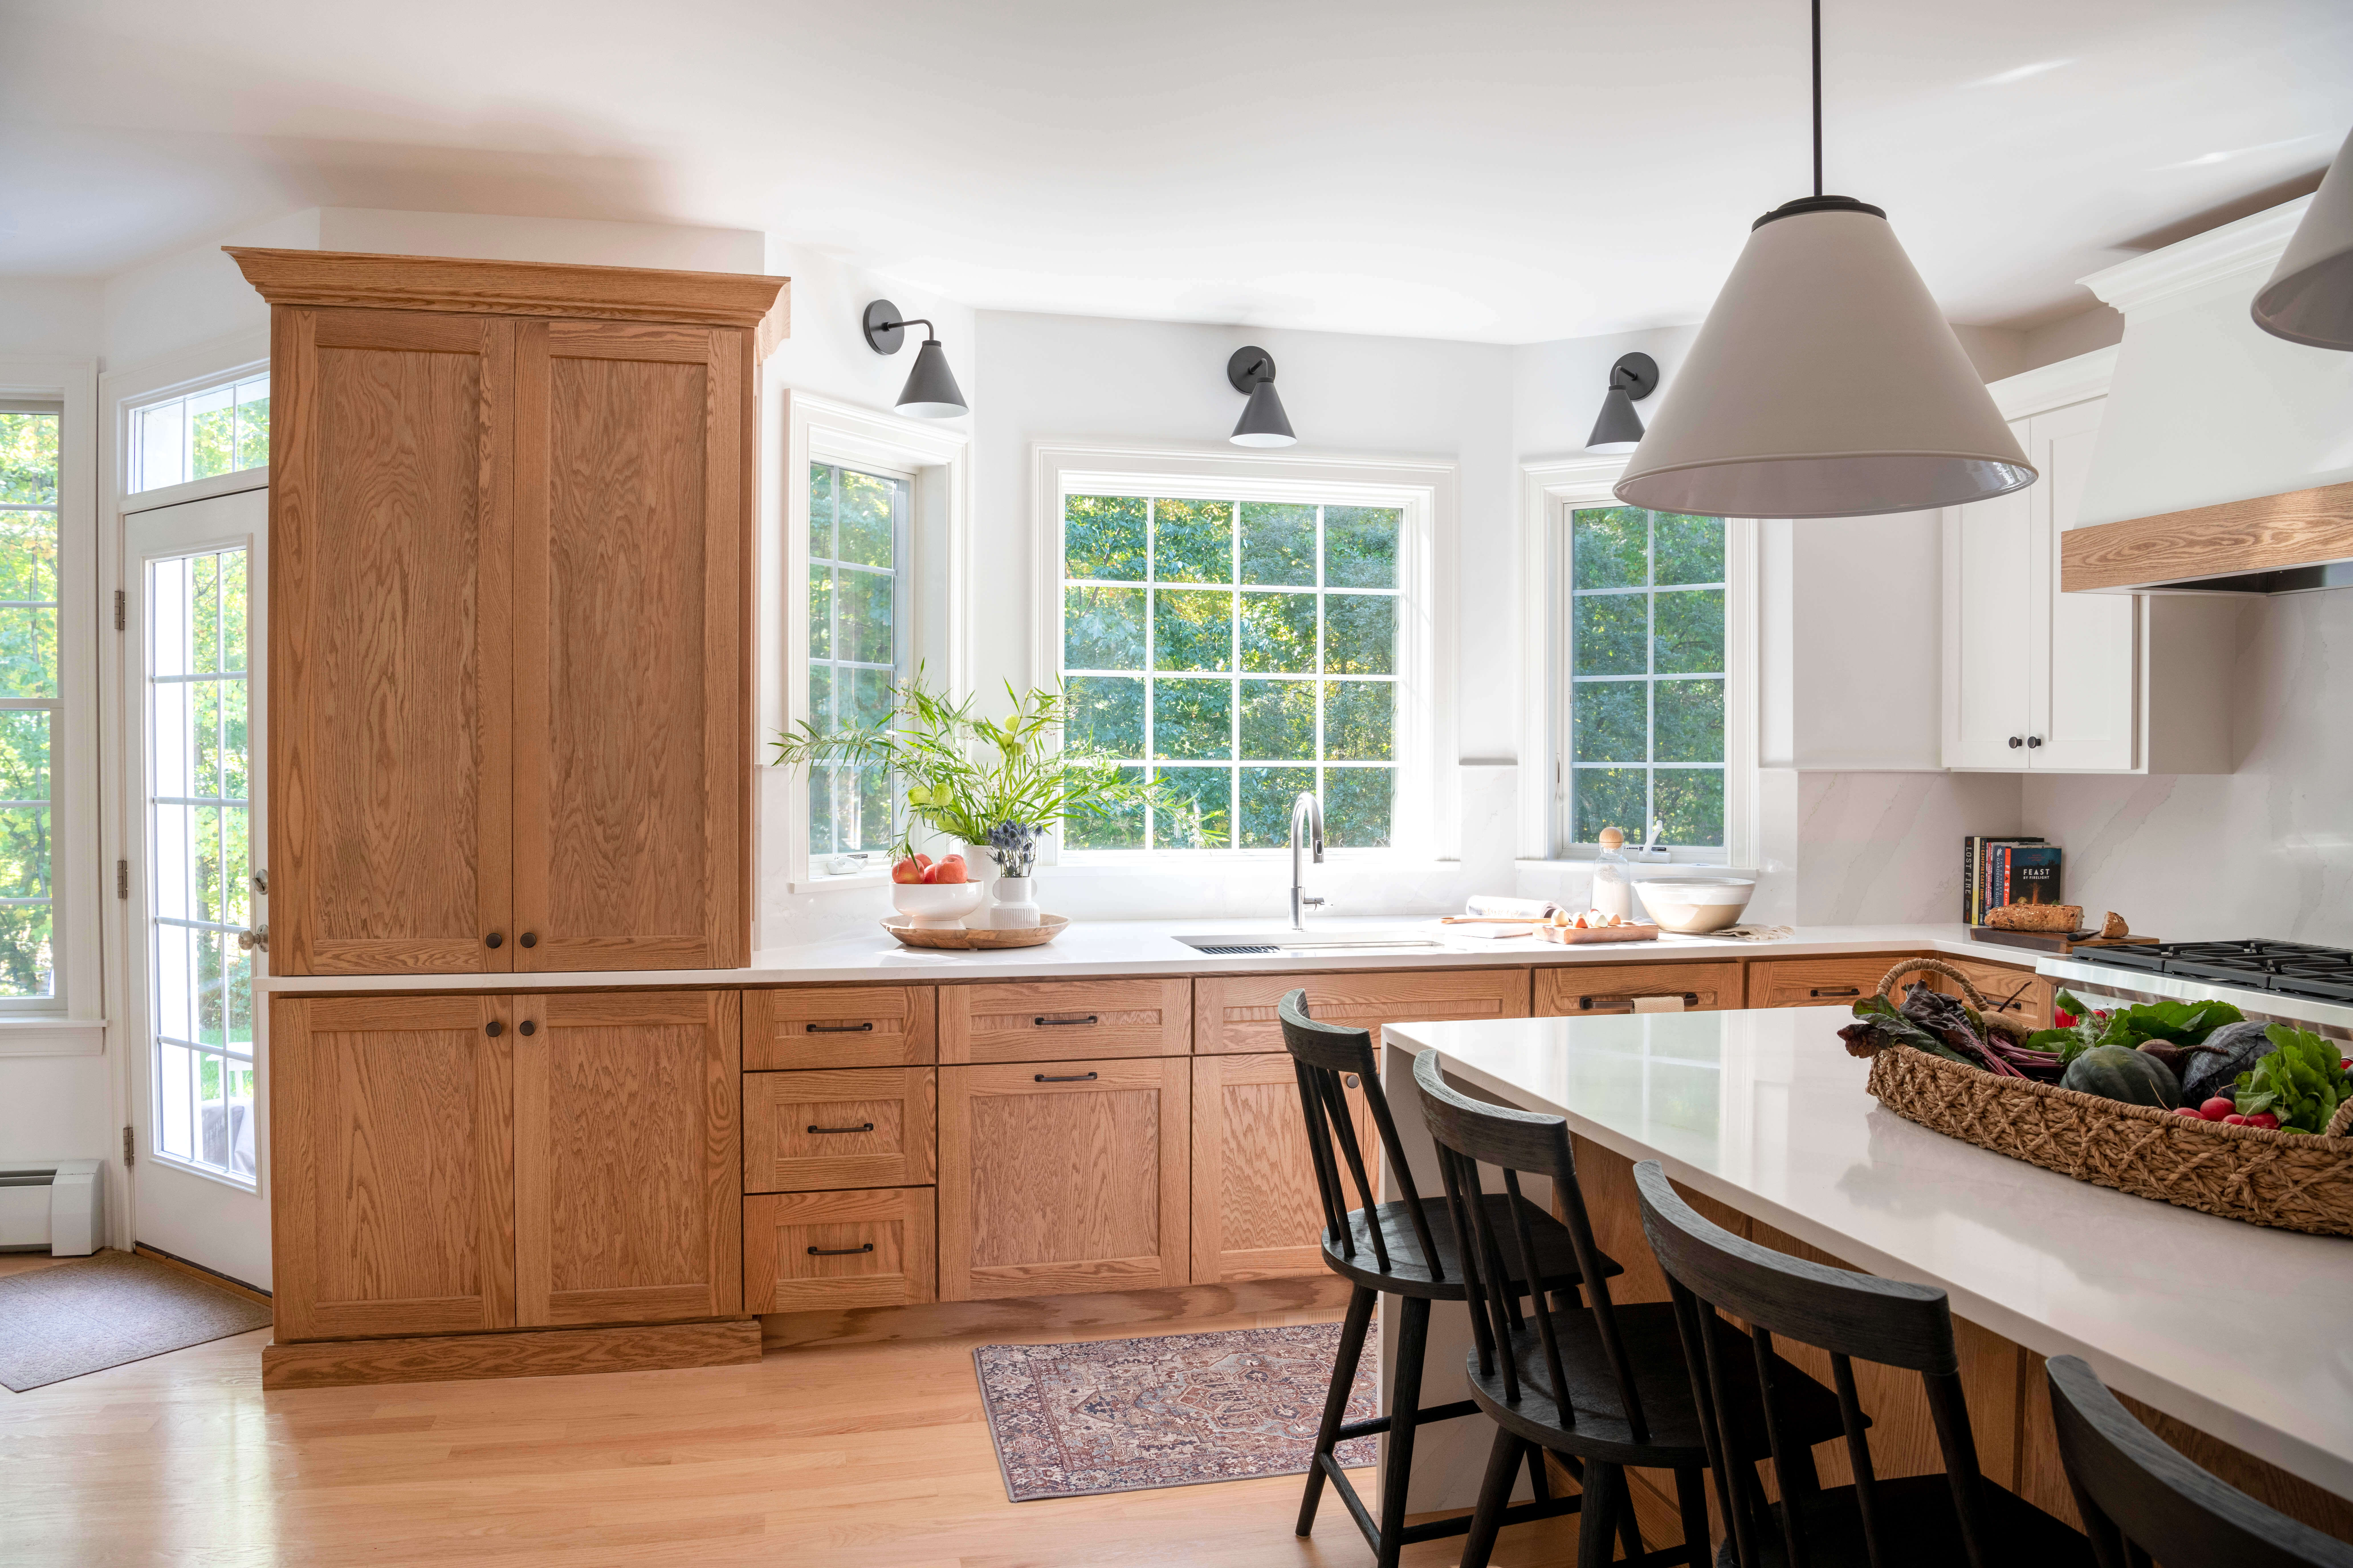 natural wood cabinetry, large white pendant light, wood flooring, black counter seating, white countertop and island